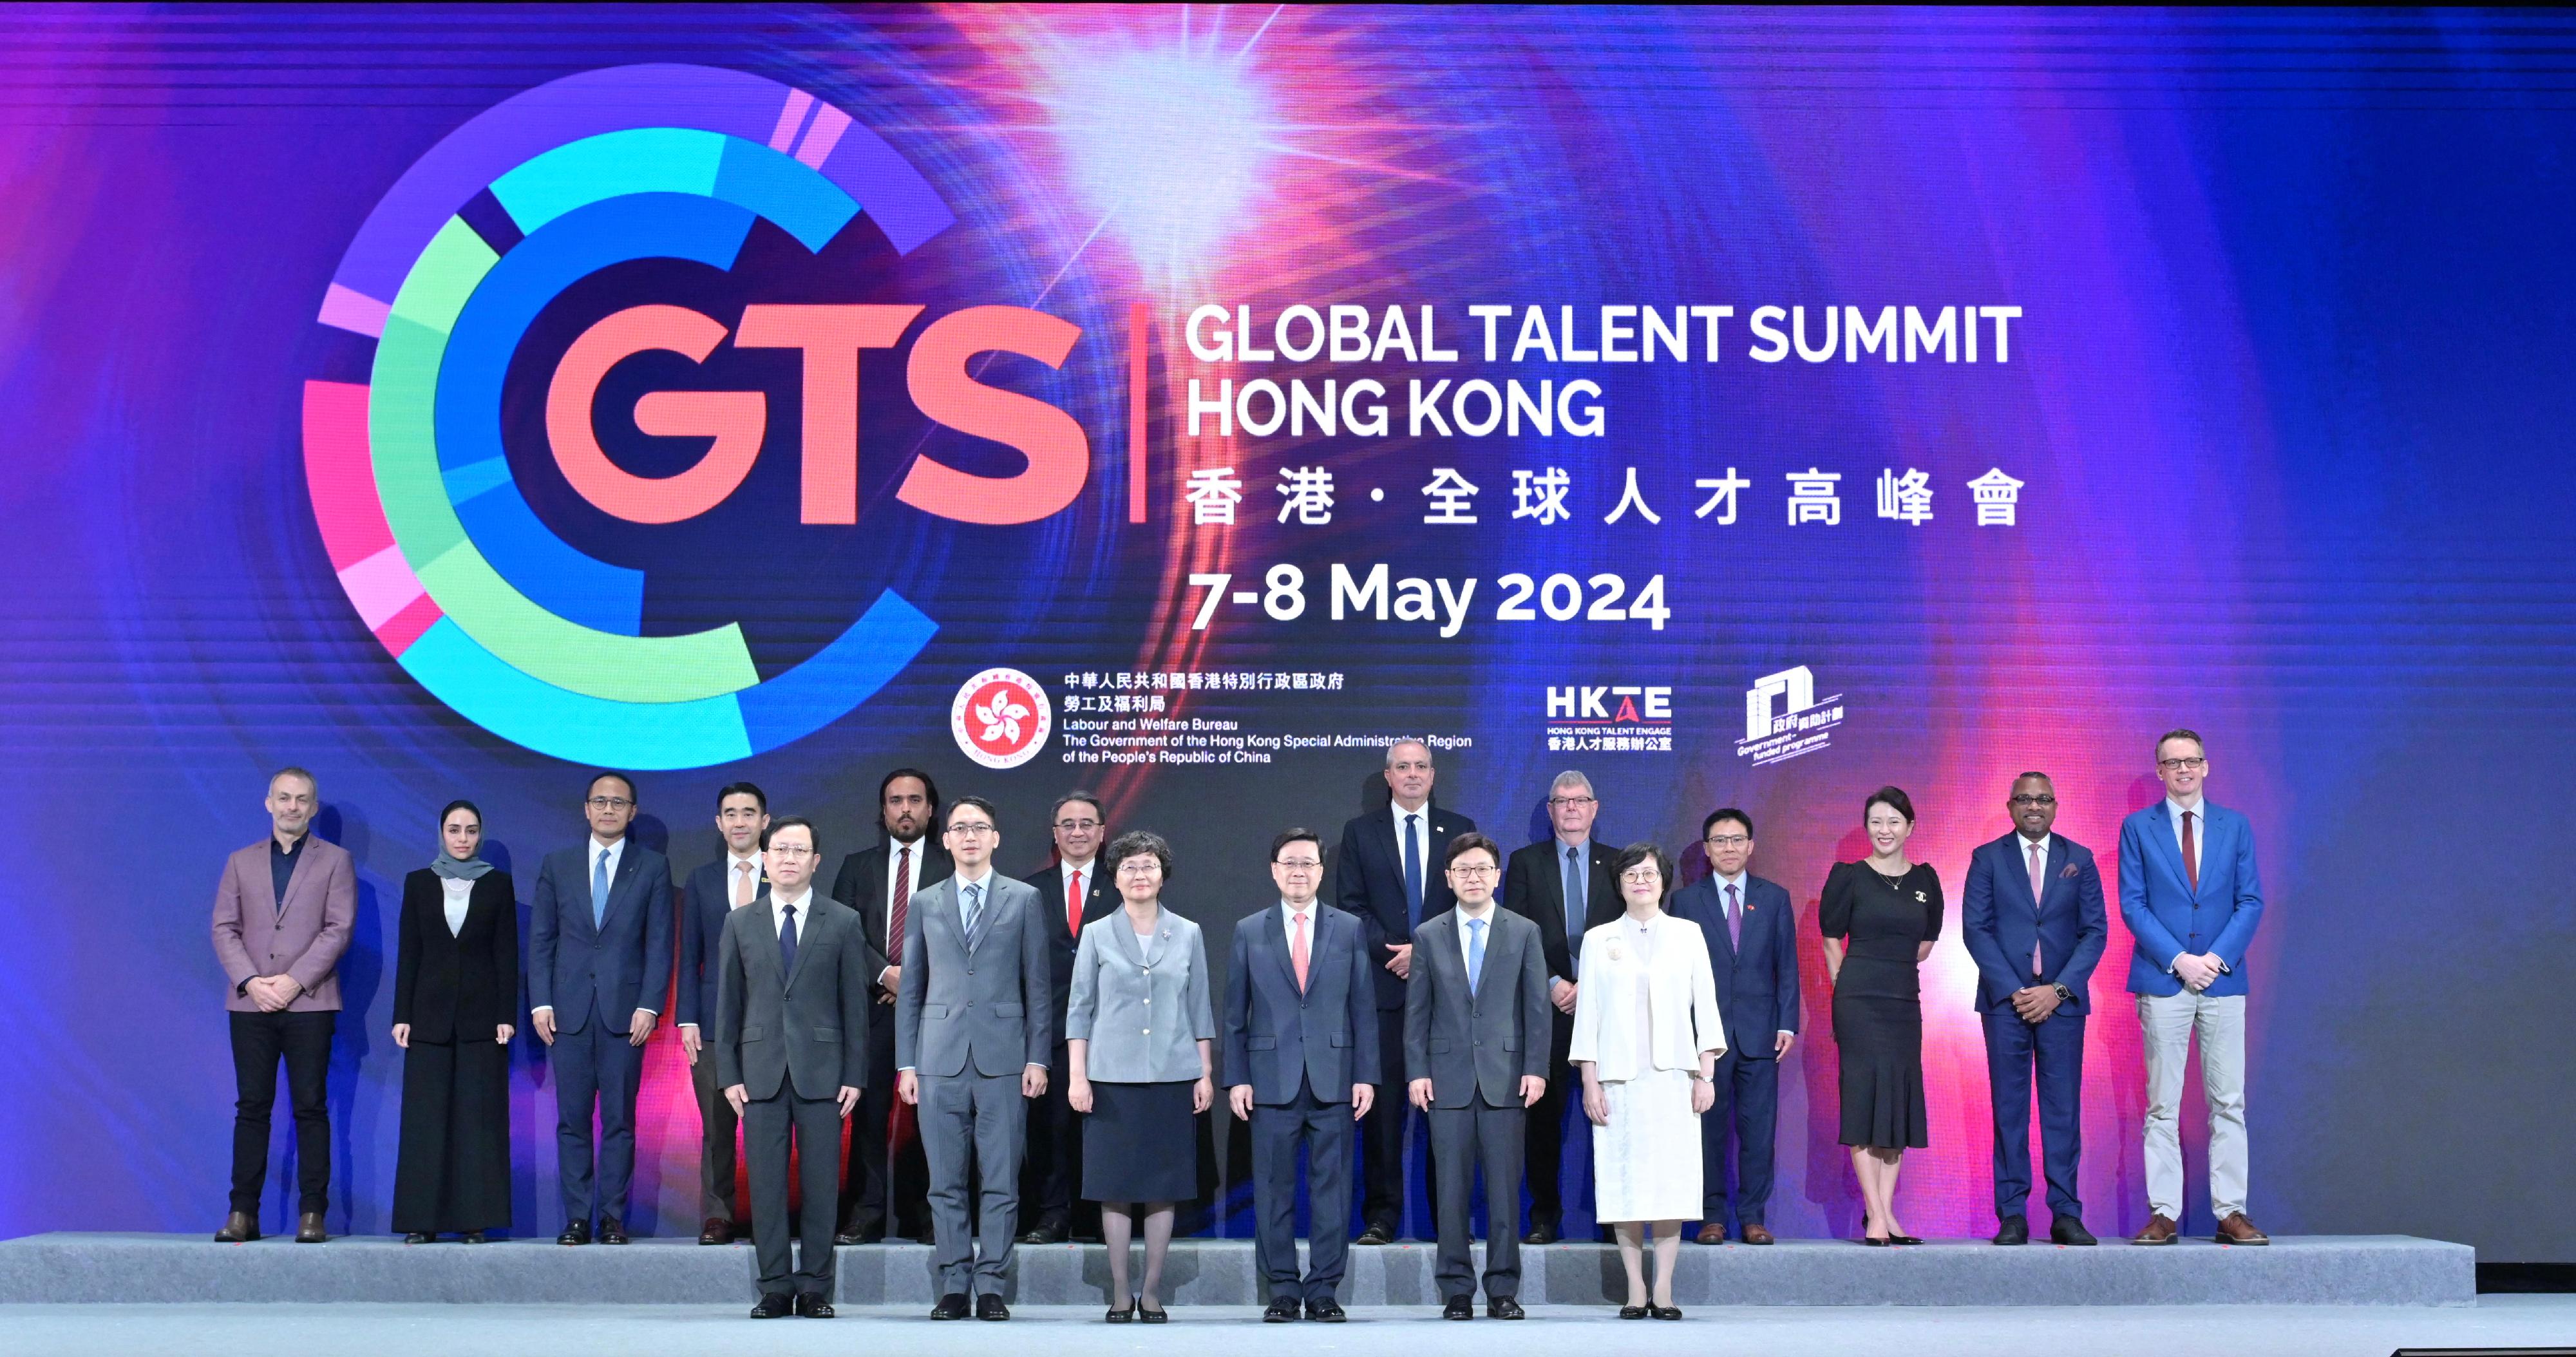 CLASS Dean Co-hosts a Panel Discussion at Global Talent Summit · Hong Kong